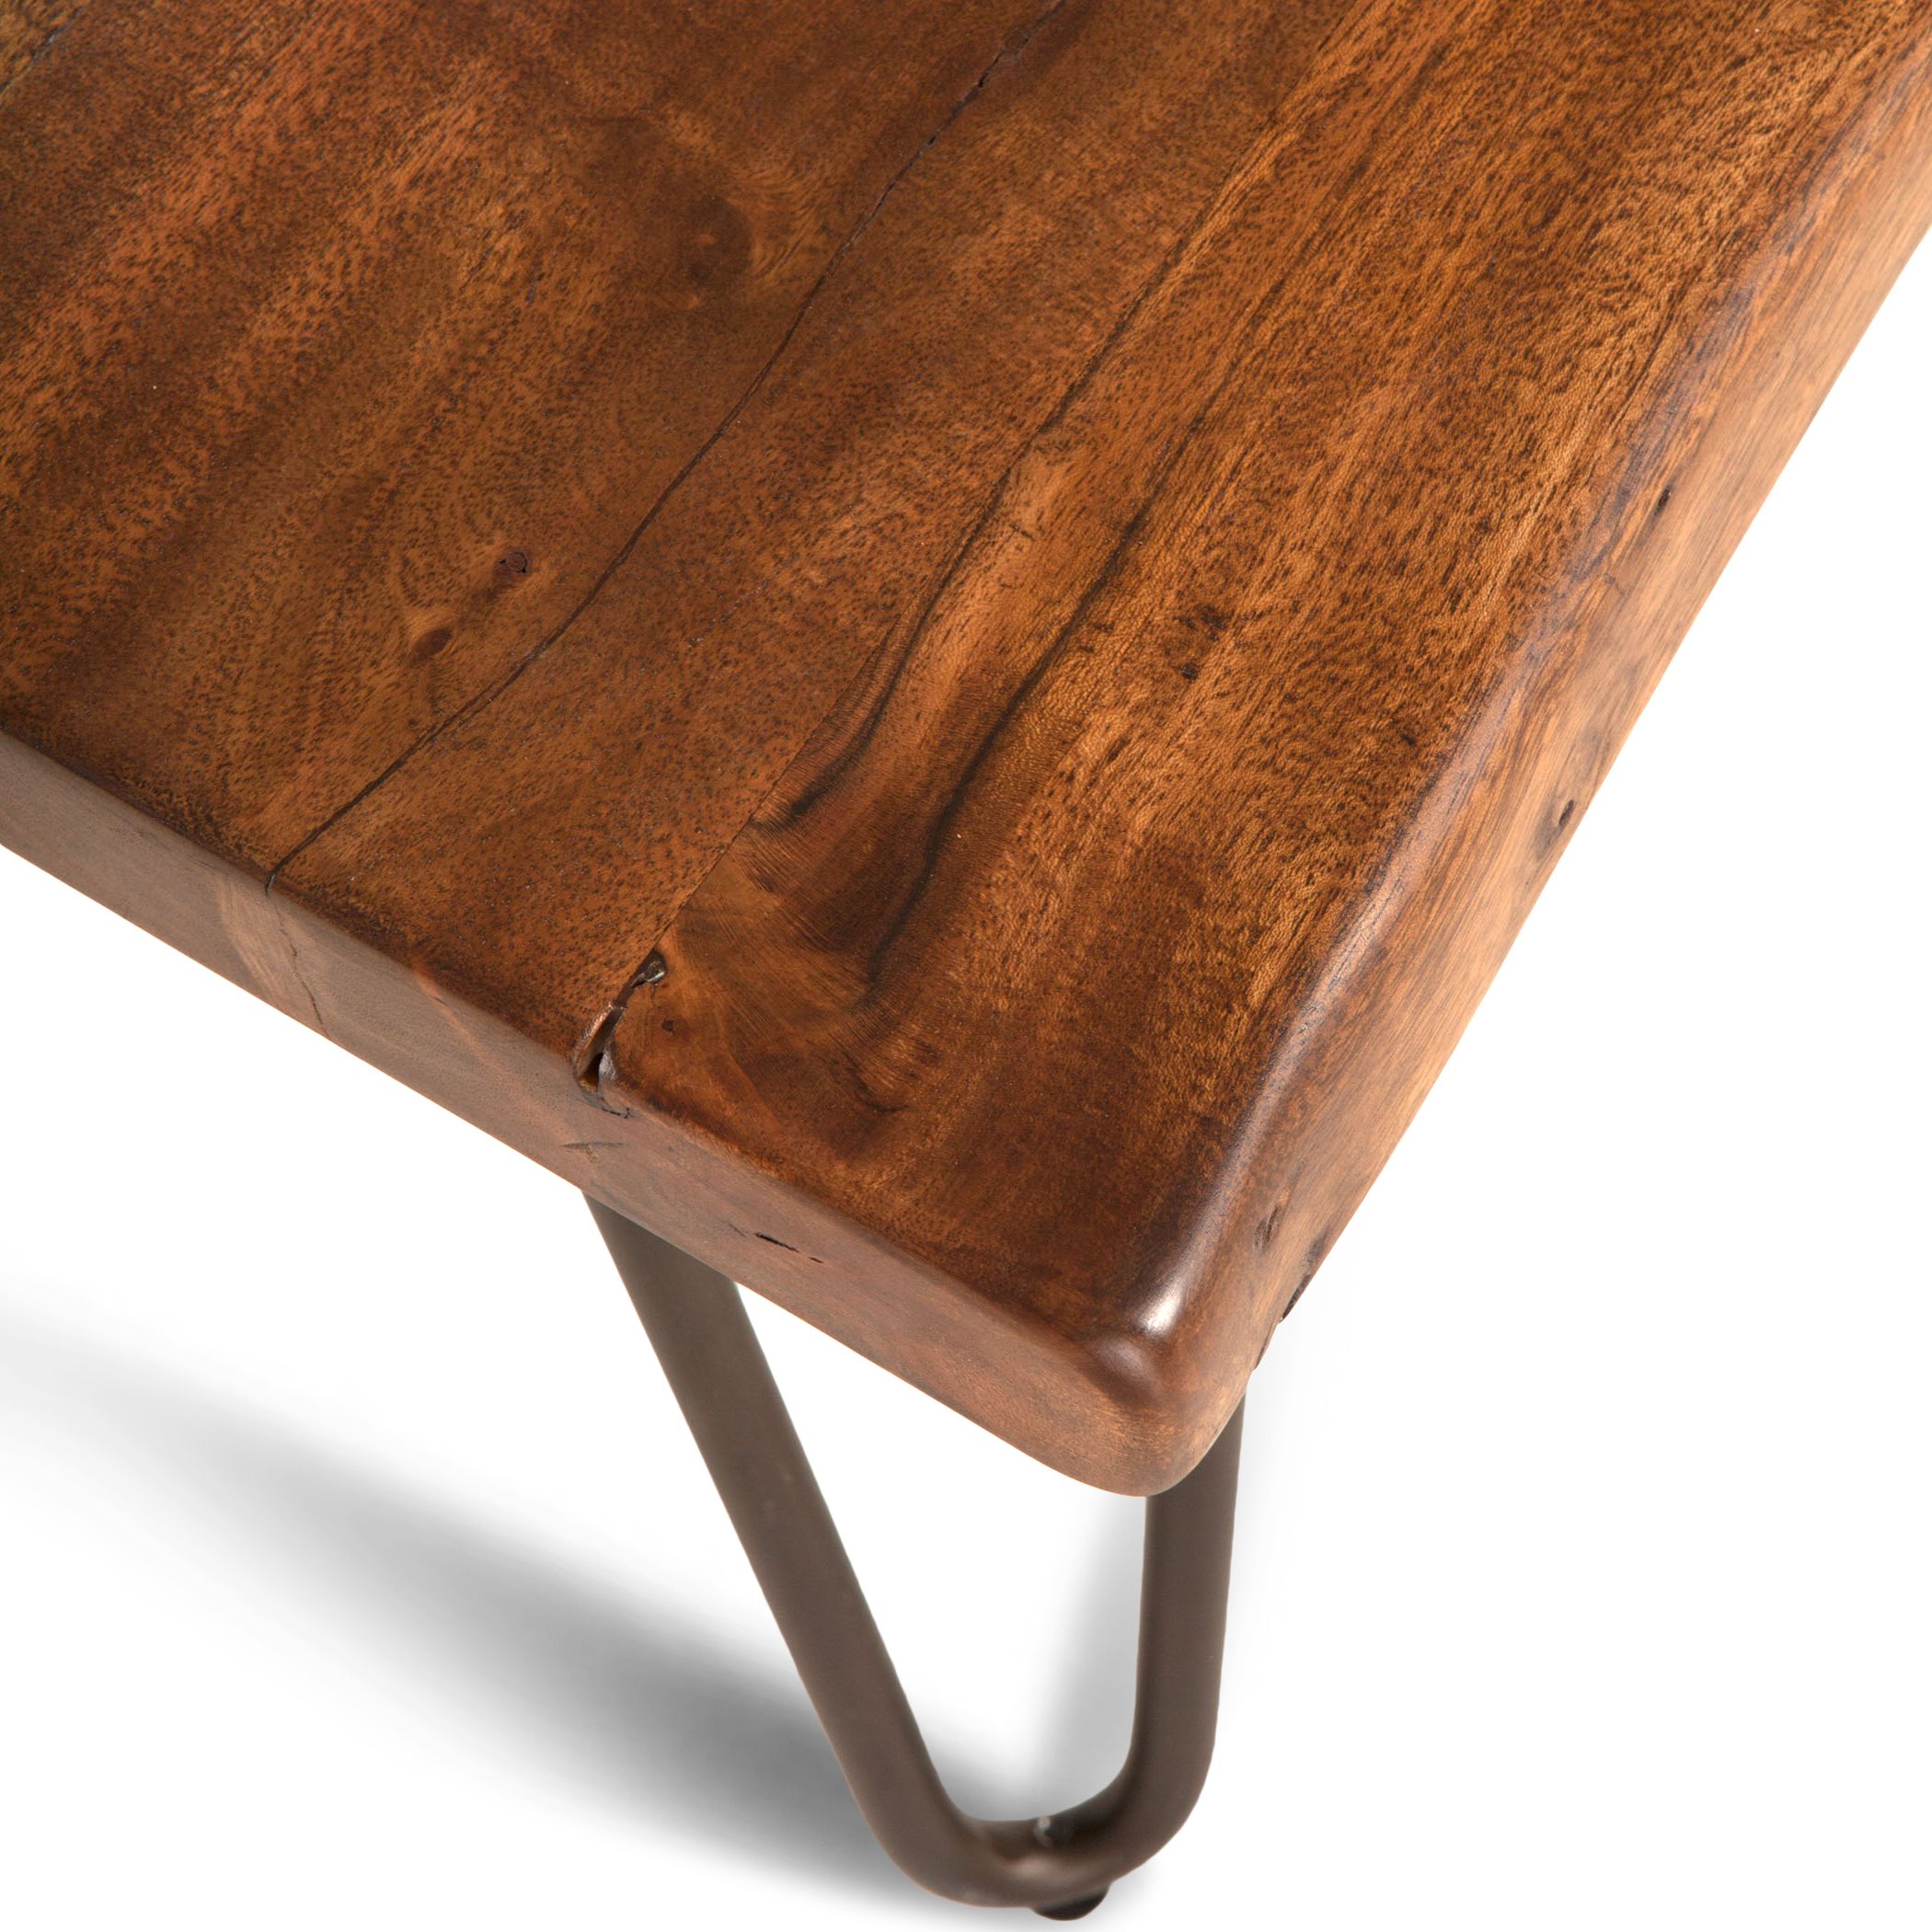 Vail Acacia Wood Live Edge Coffee Table In Walnut Finish Within Famous Walnut Coffee Tables (Gallery 17 of 20)